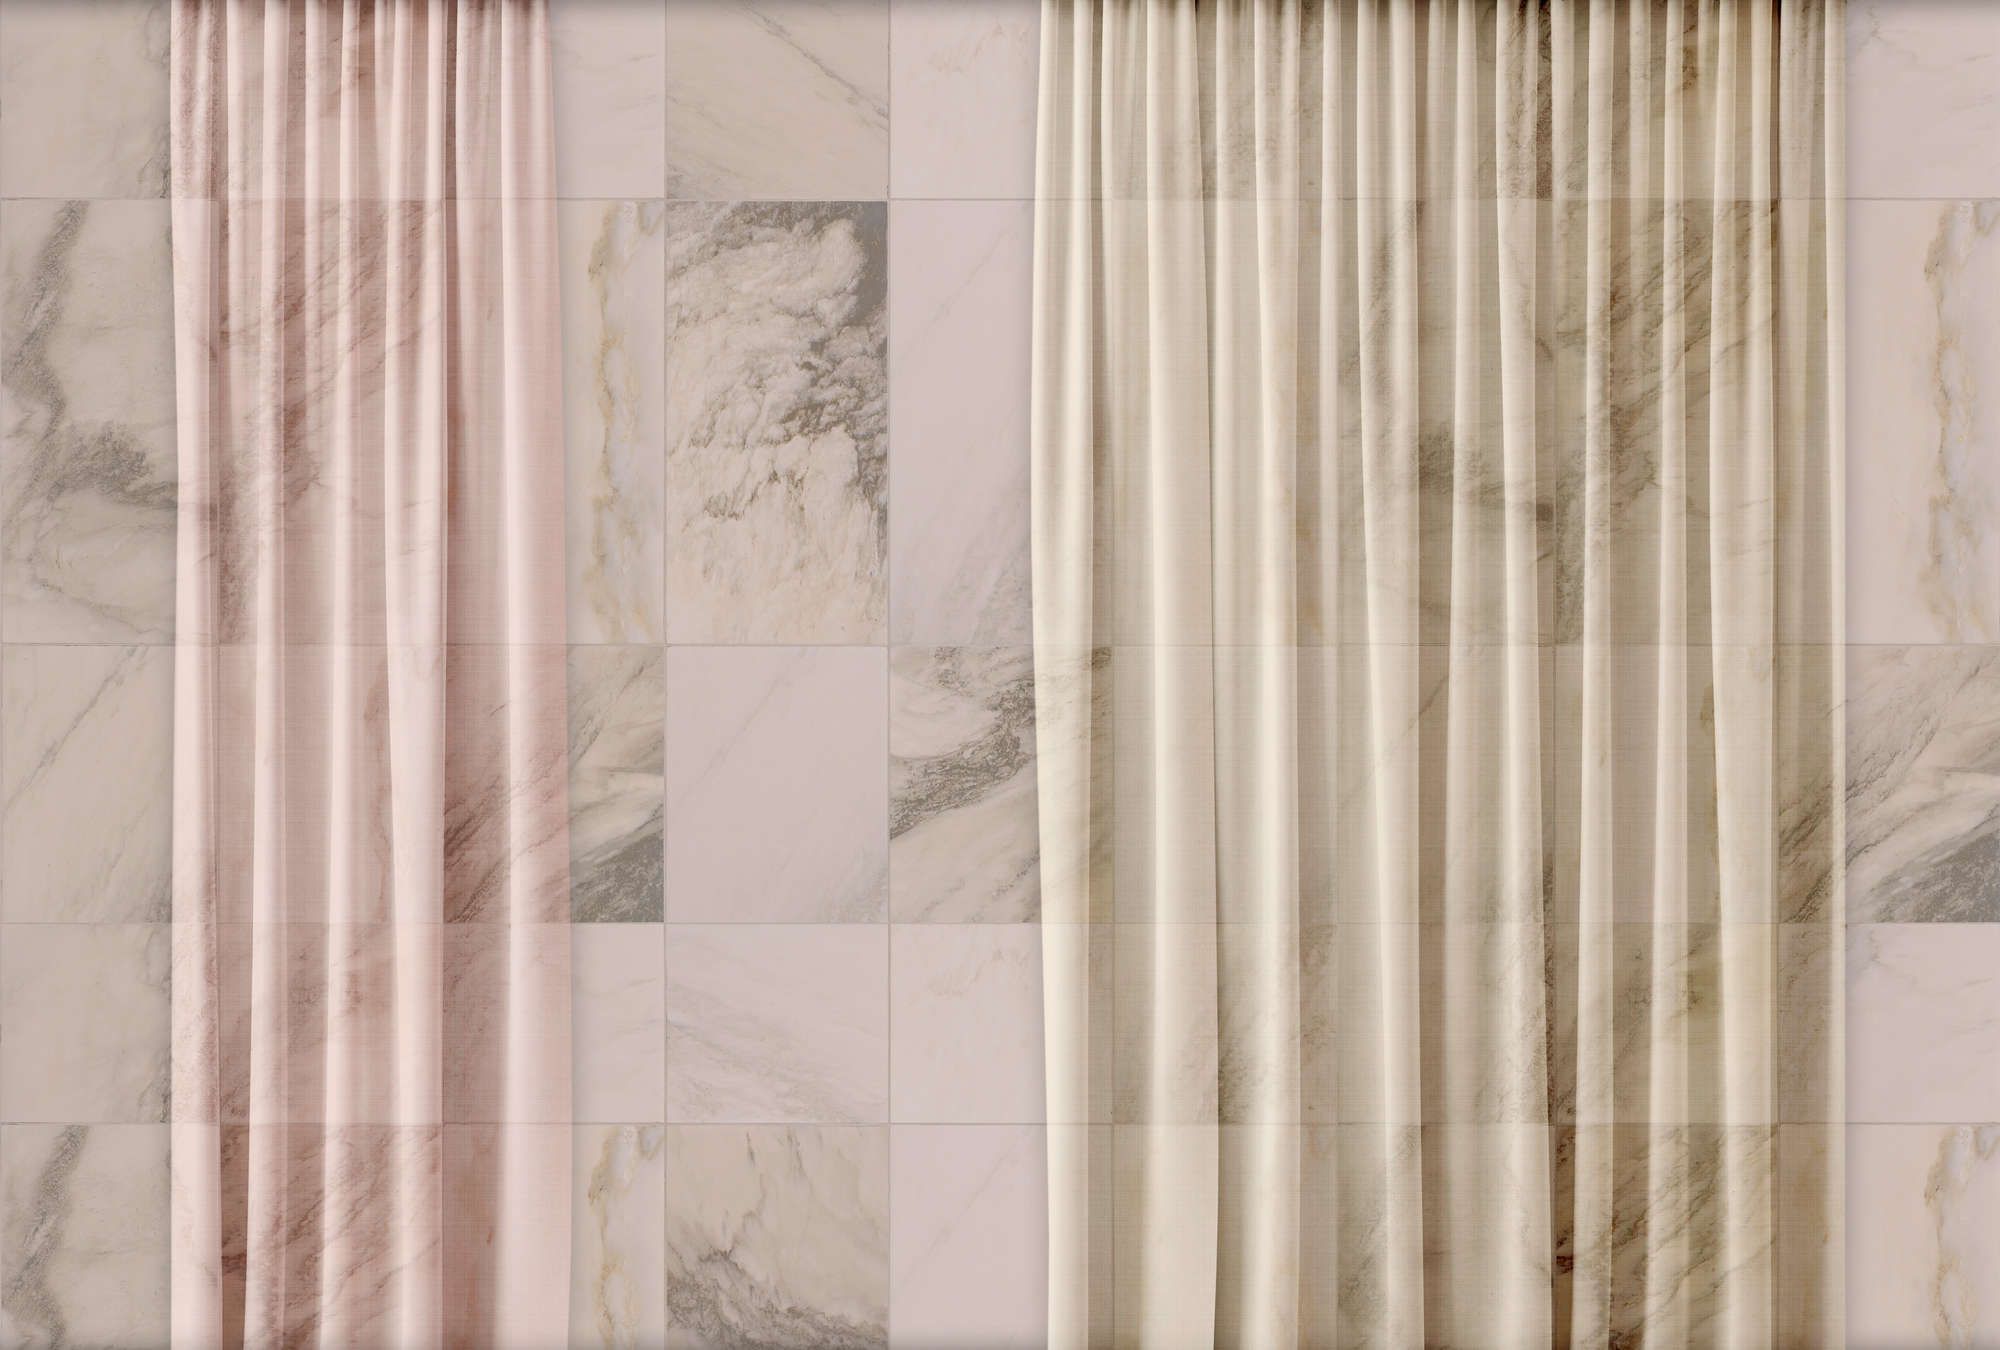             Photo wallpaper »nova 3« - subtly falling curtains in front of a beige marble wall - matt, smooth non-woven fabric
        